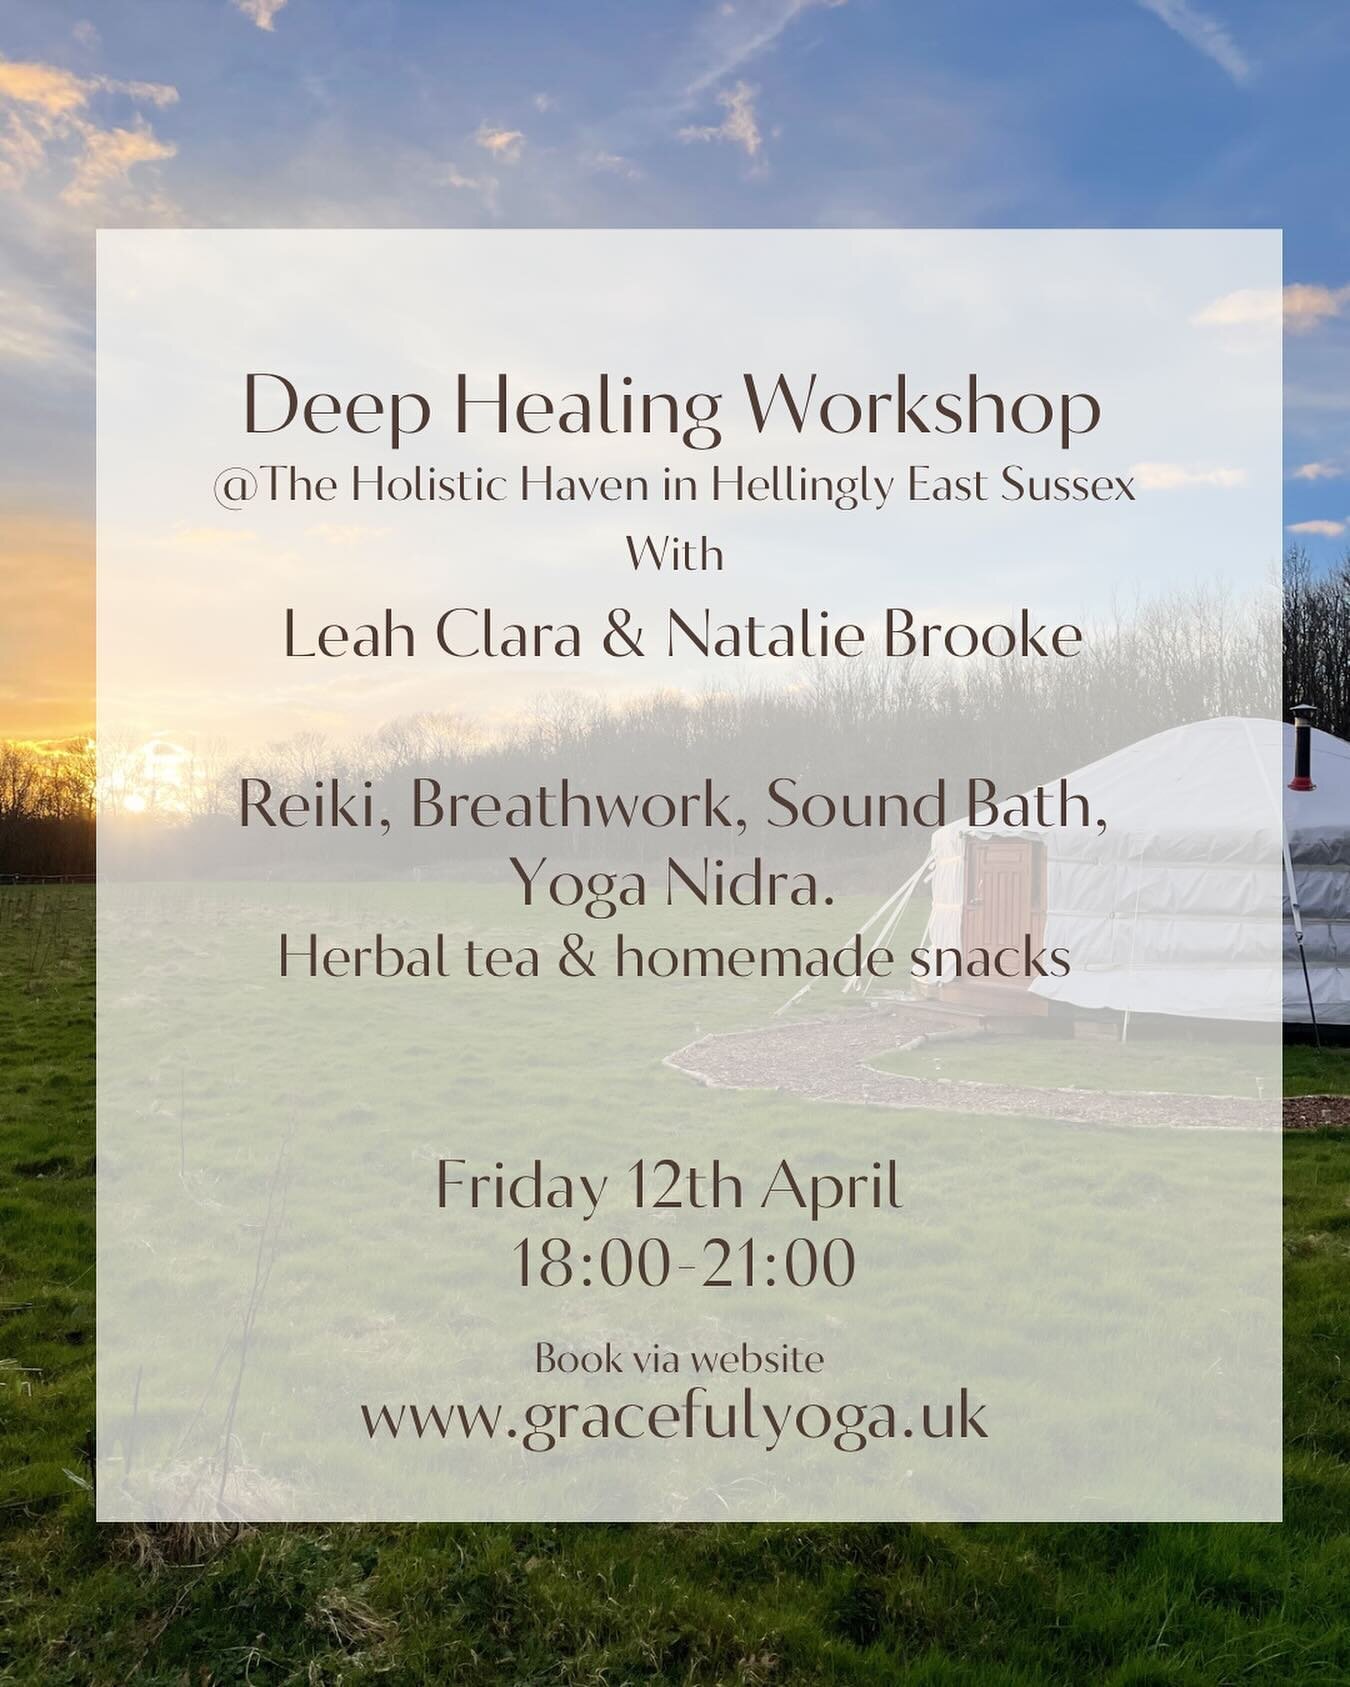 We had so much fun on the last workshop, that we couldn&rsquo;t wait to get another one out there, for you all to come and immerse yourself into space @theholistichaven_uk 

Deep Healing Work shop with Leah Clara @spirit.of.reiki1 &amp; Natalie Brook